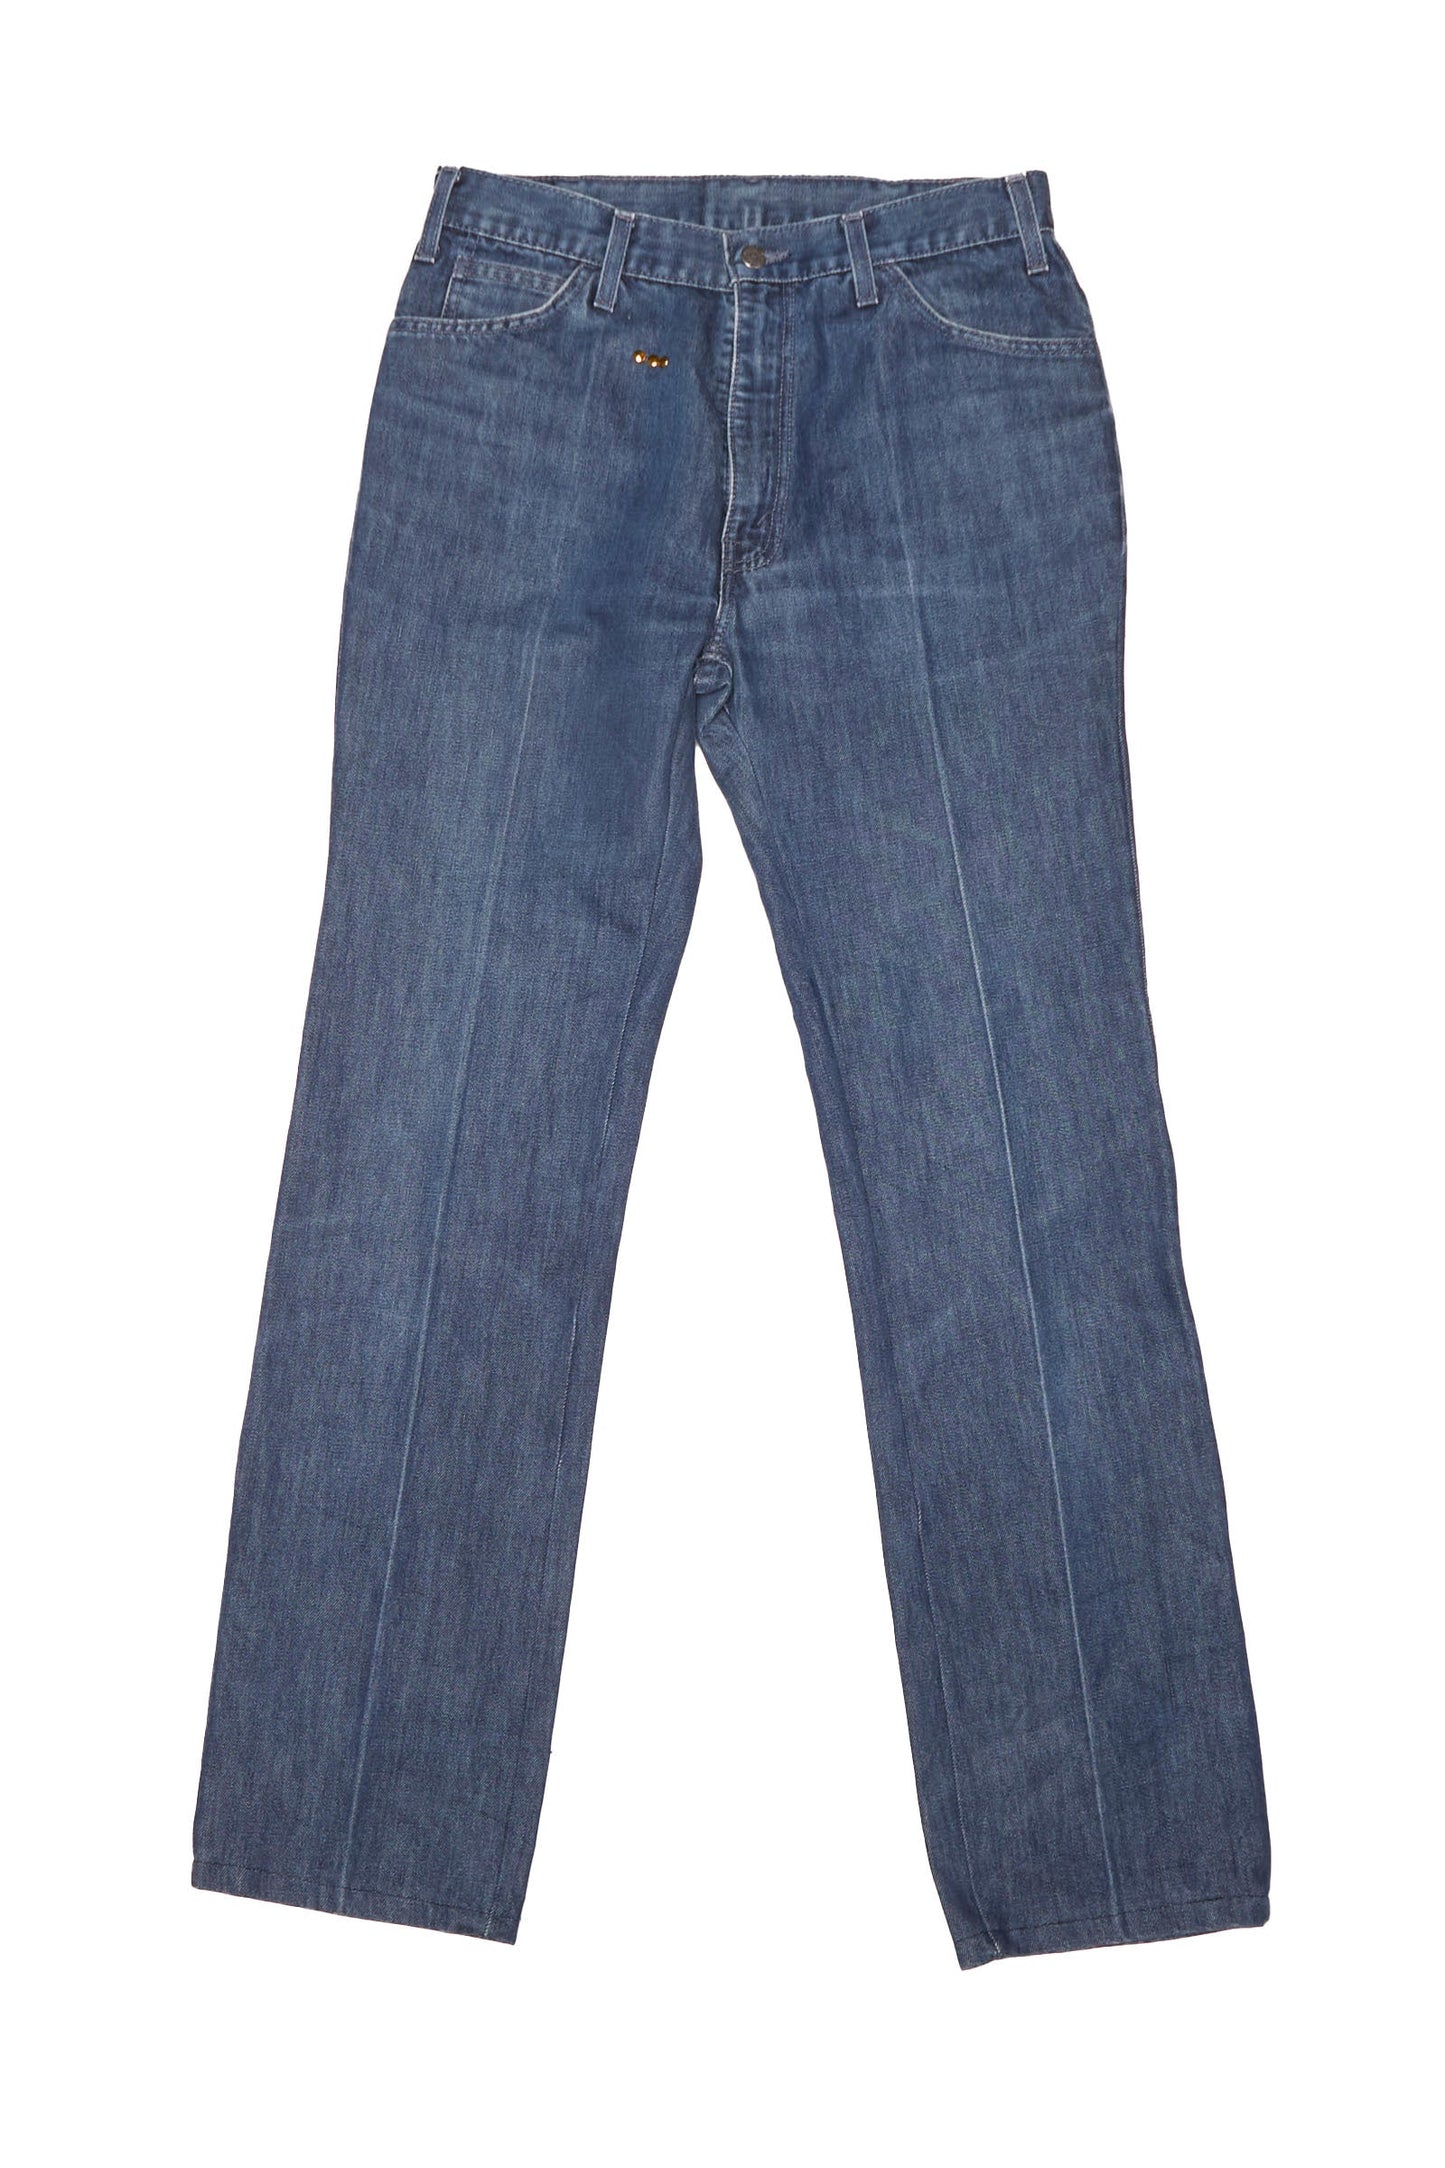 zip Centre Creased Levis Straight Cut Jeans - W32" L31"